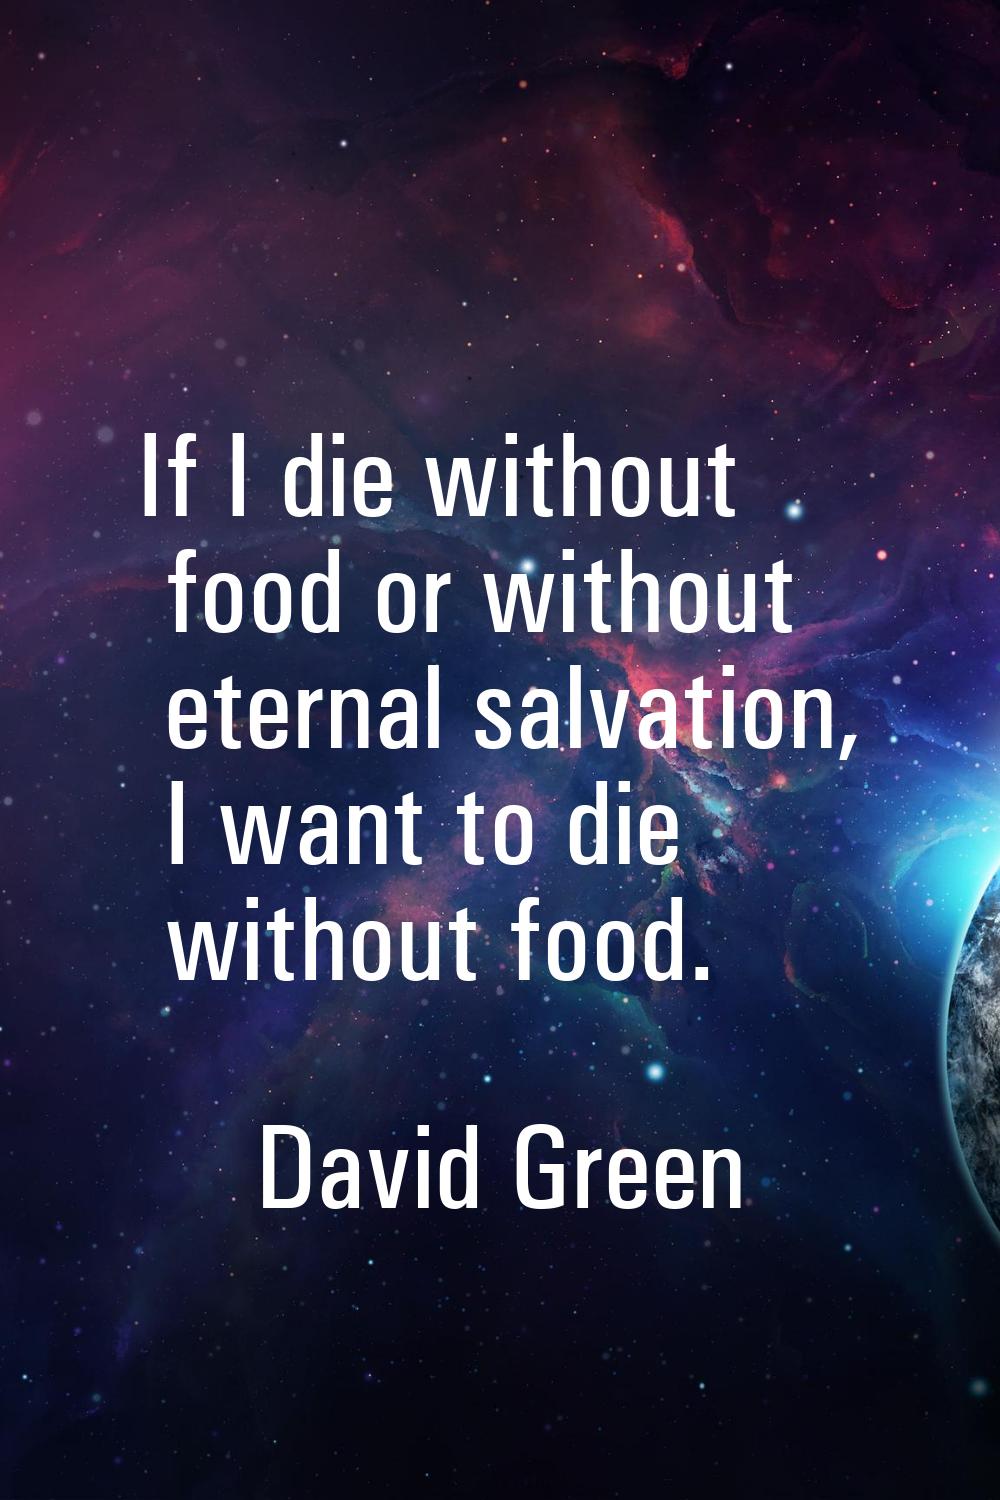 If I die without food or without eternal salvation, I want to die without food.